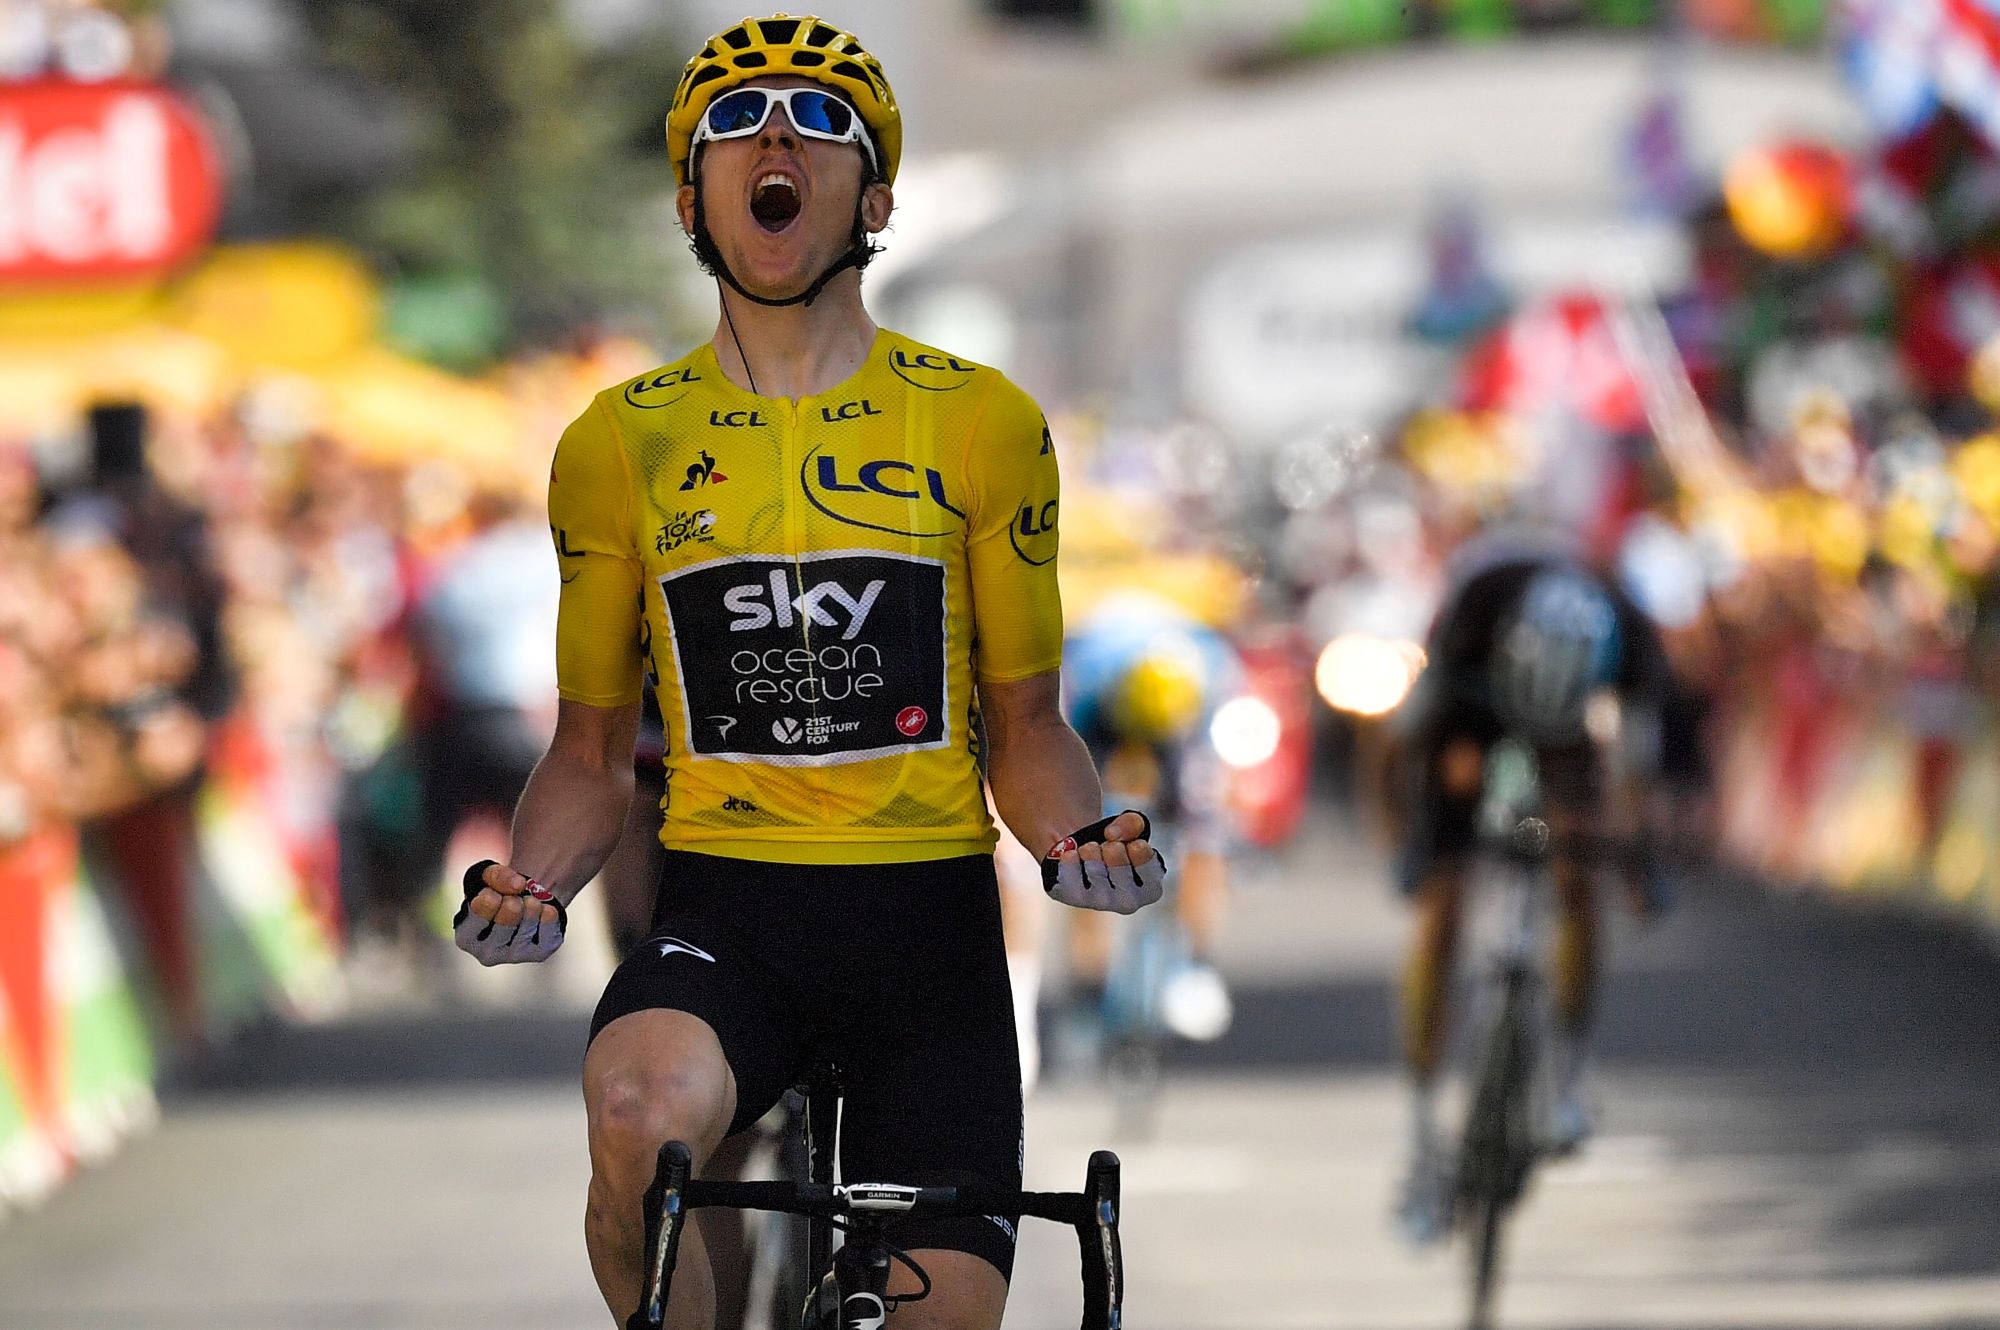 GERAINT THOMAS AND INEOS GRENADIERS MAKE A TRANSITION FROM OAKLEY TO SUNGOD FOR 2023